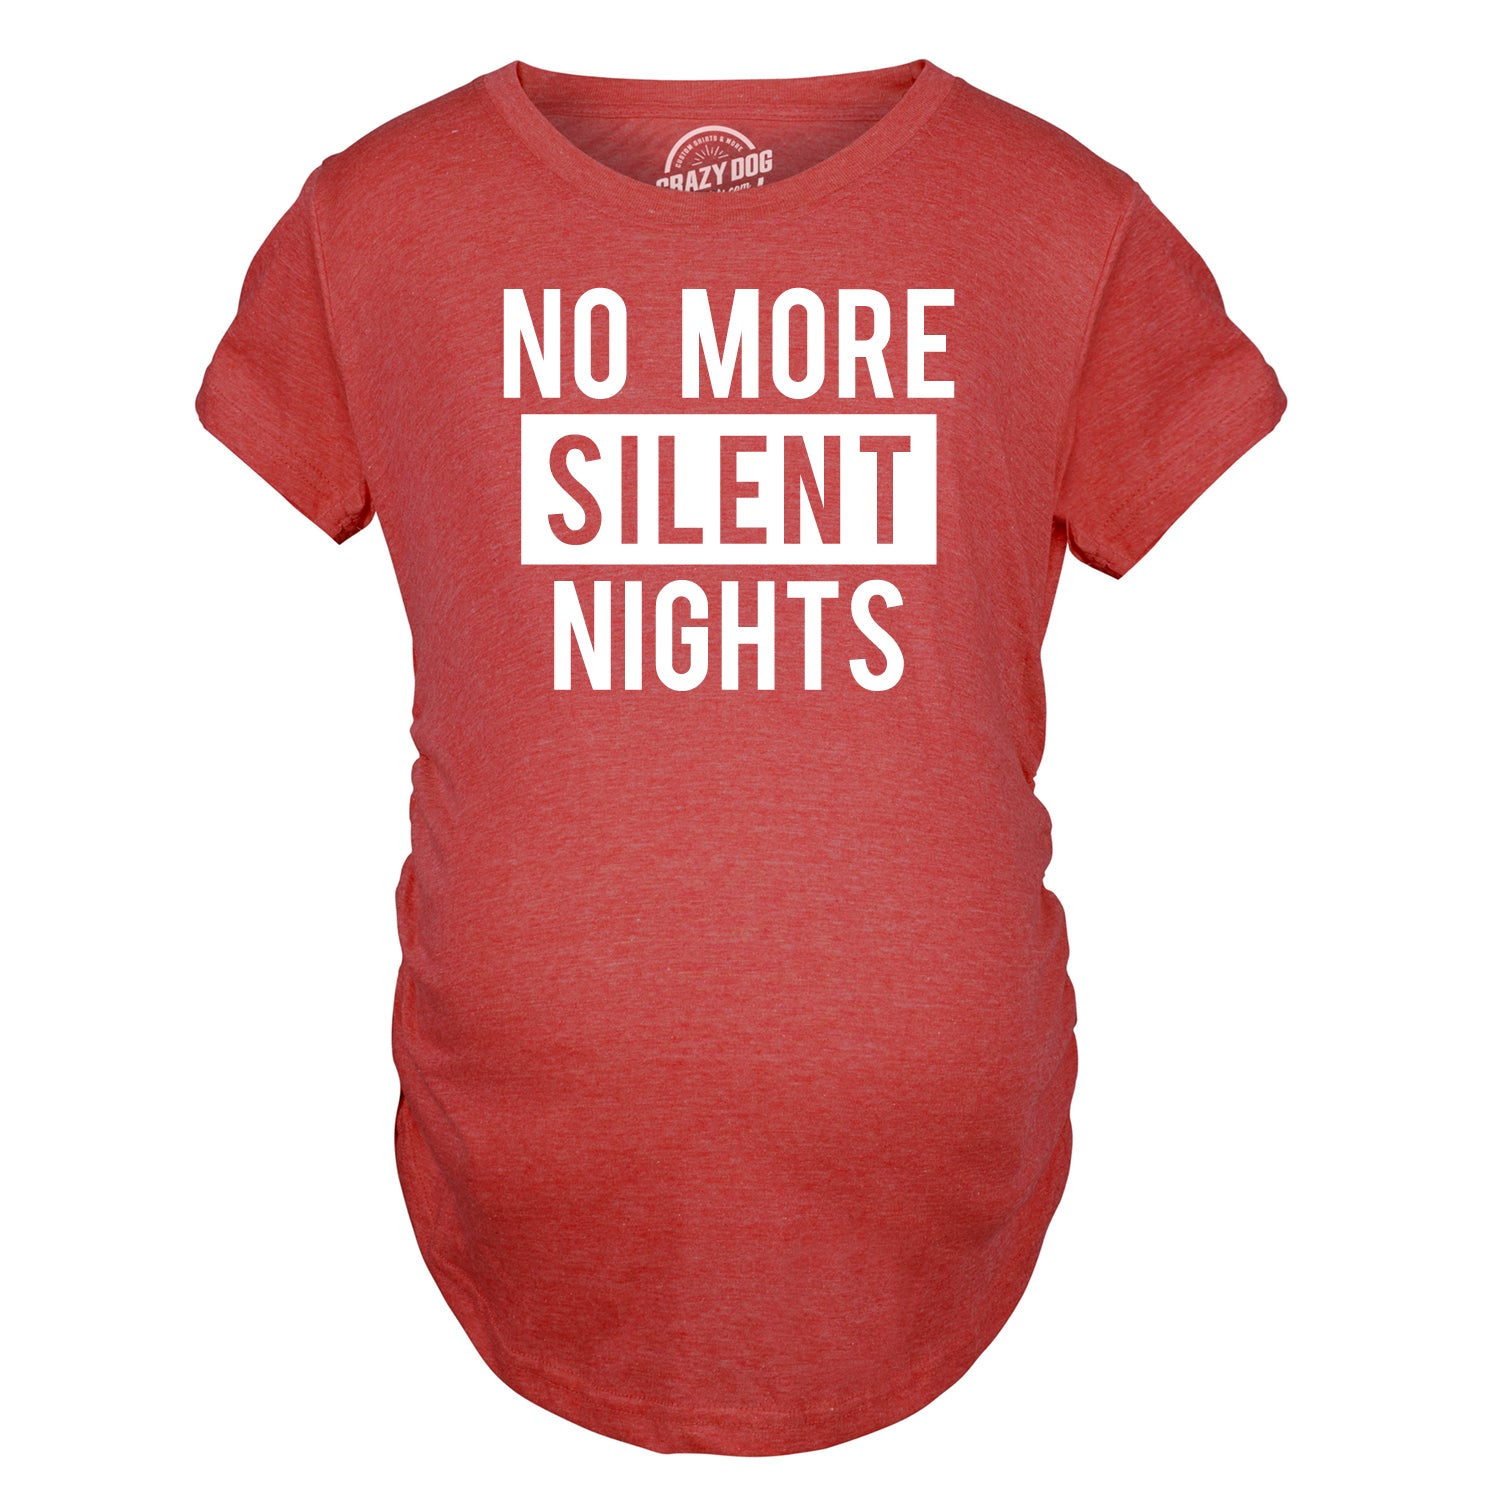 Funny Red No More Silent Nights Maternity T Shirt Nerdy Christmas Tee